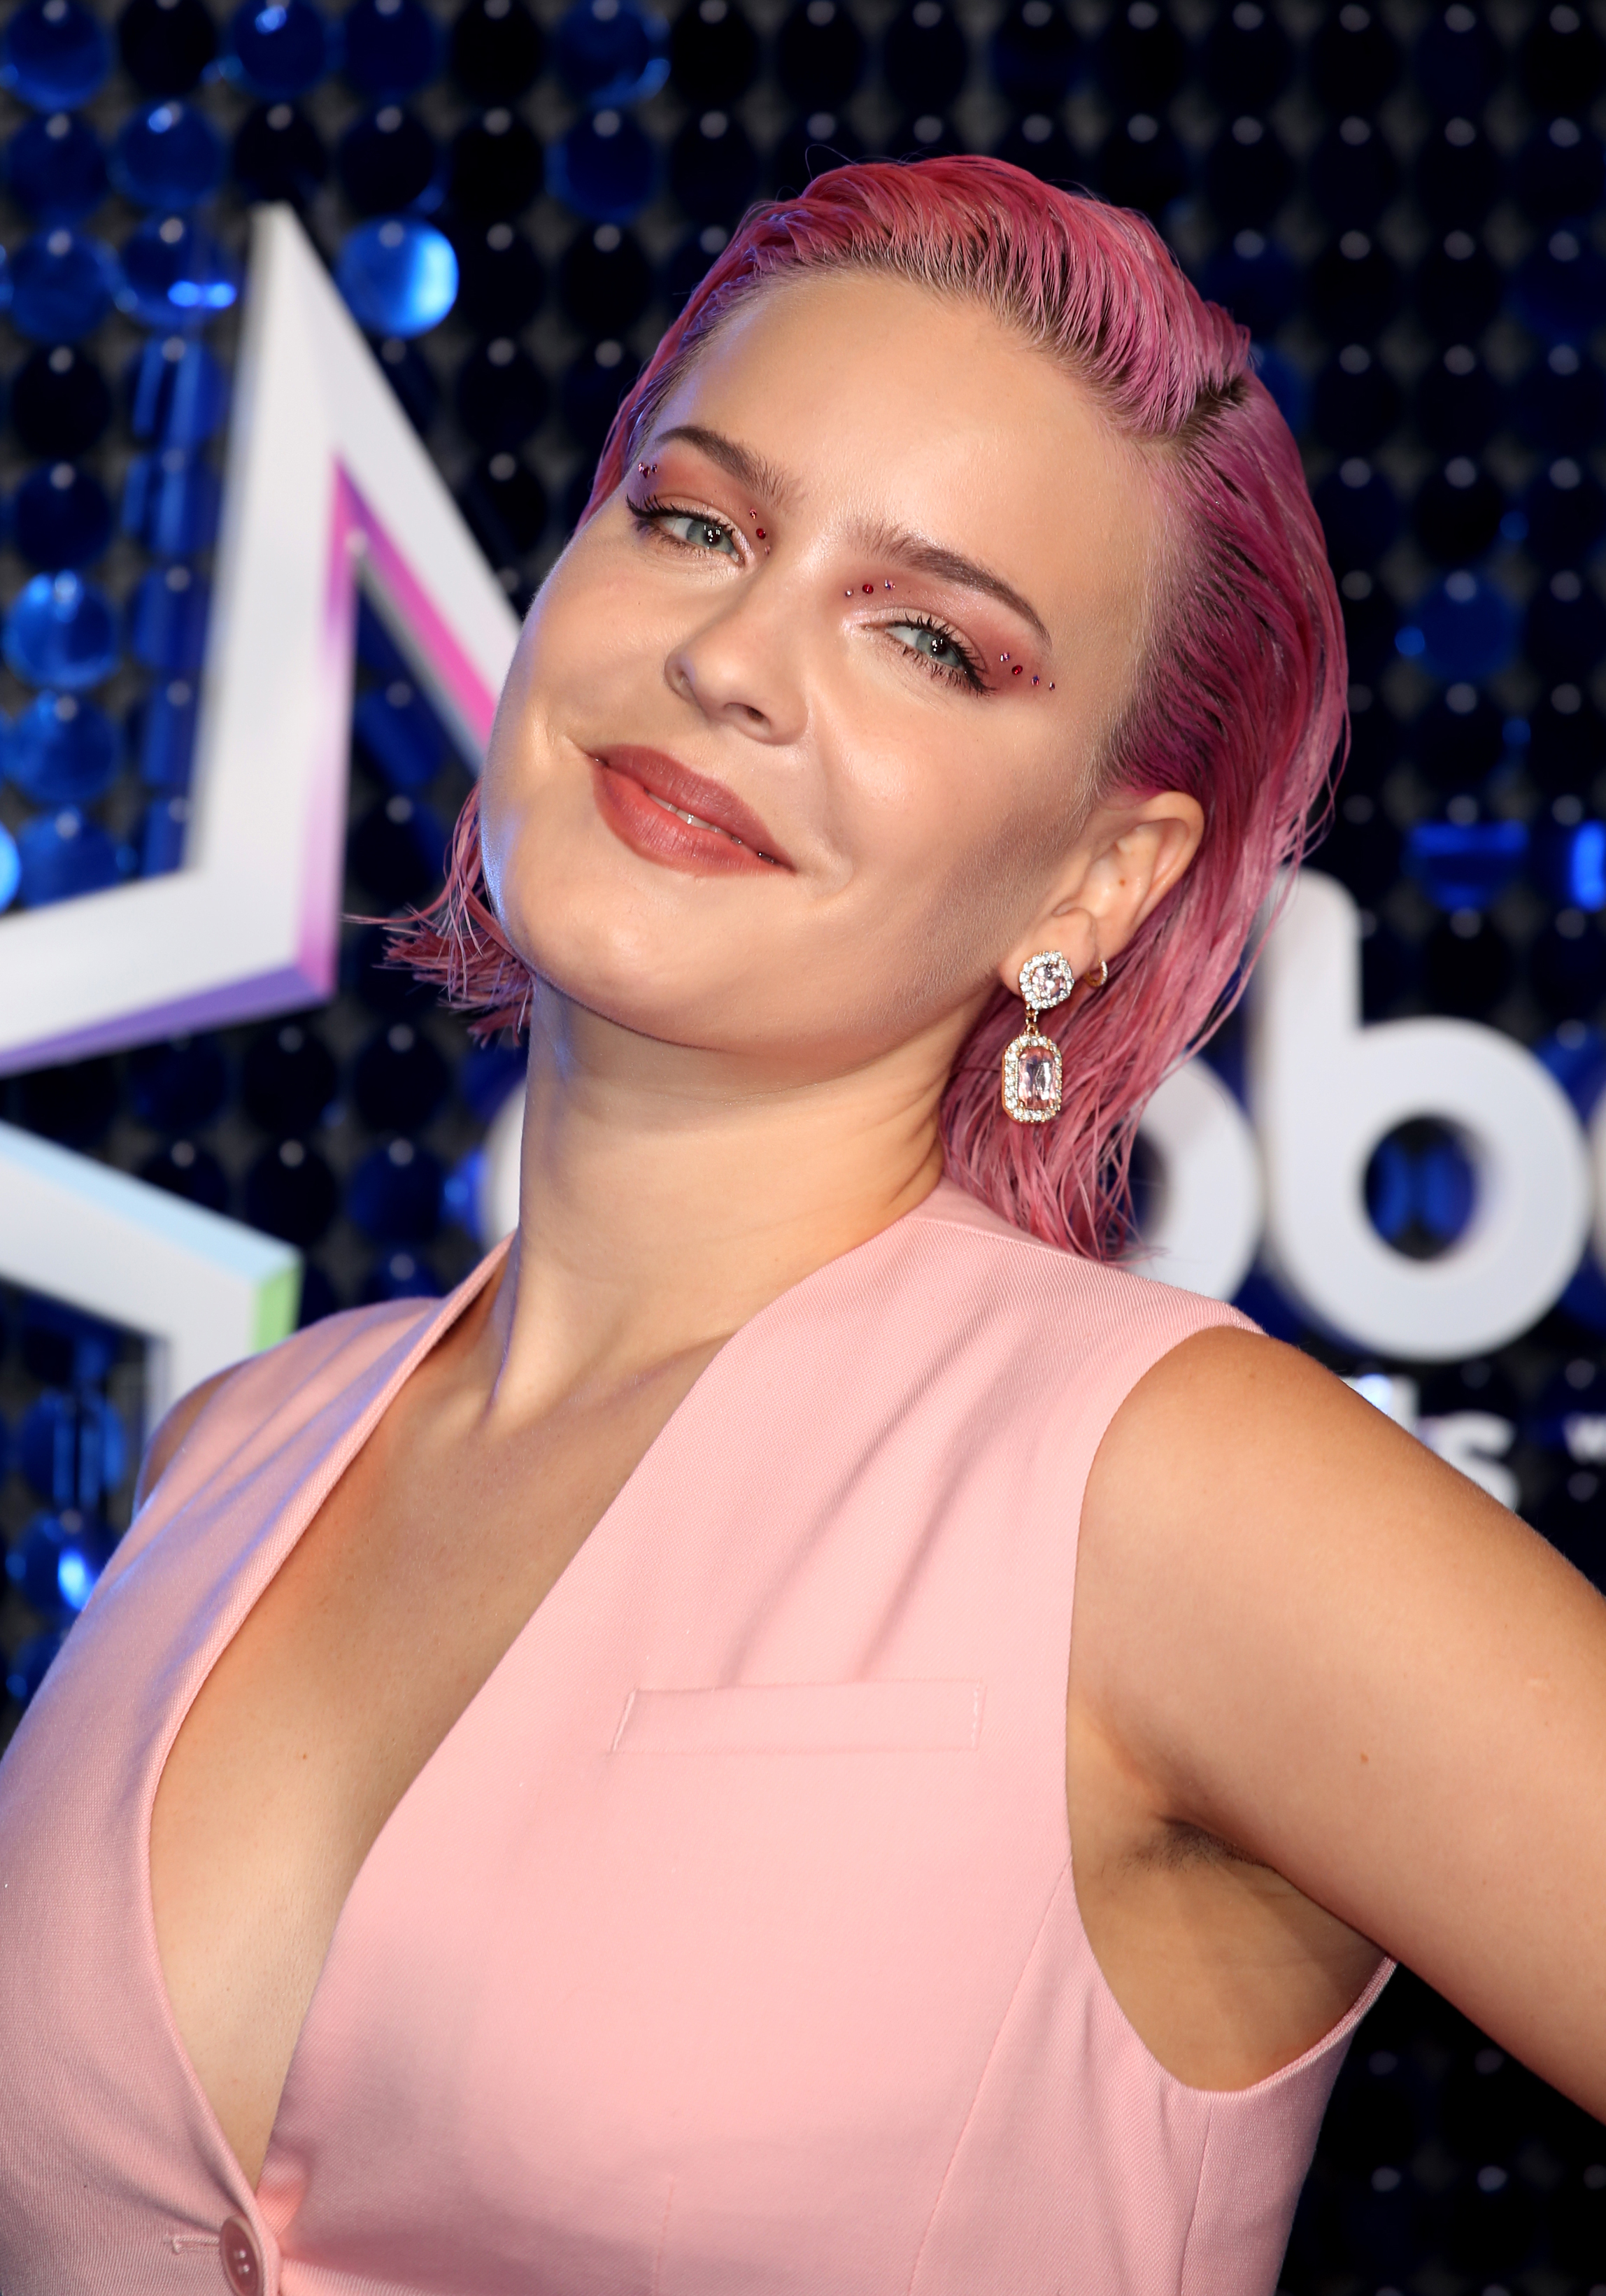 Anne Marie attending the Global Awards 2020 (PA)